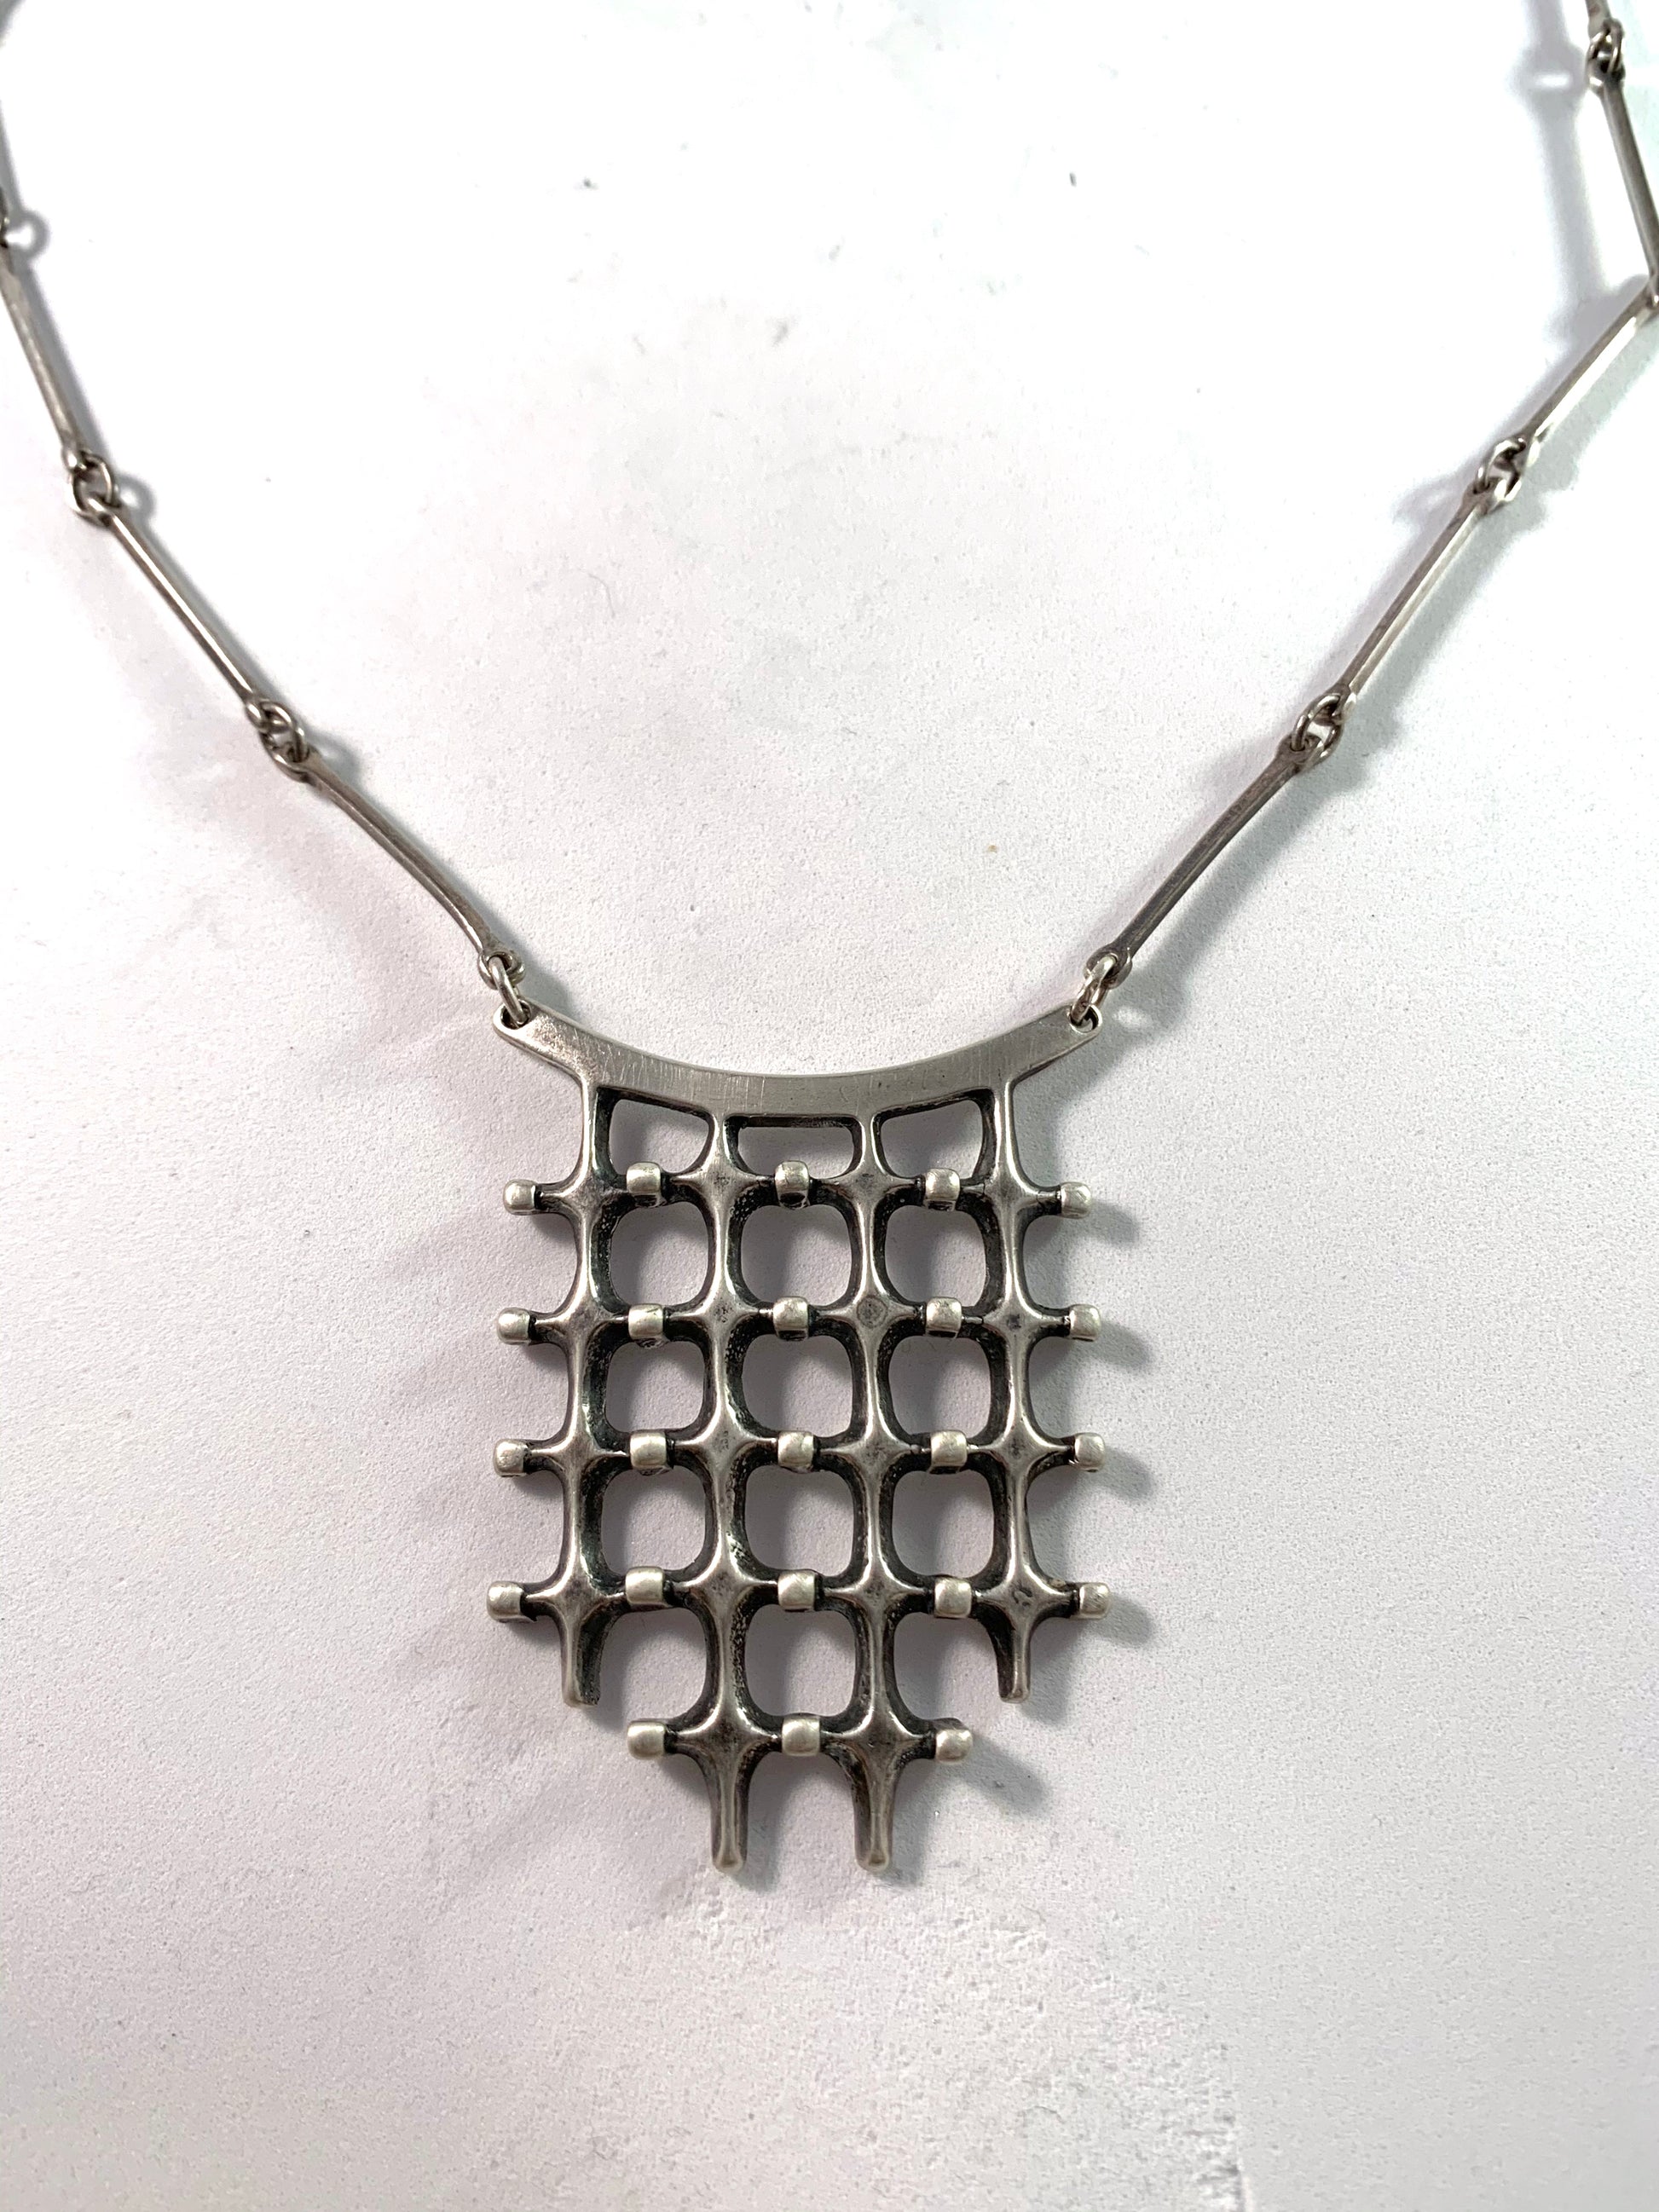 Marianne Berg for David Andersen, Norway 1960s Sterling Silver Large Necklace.